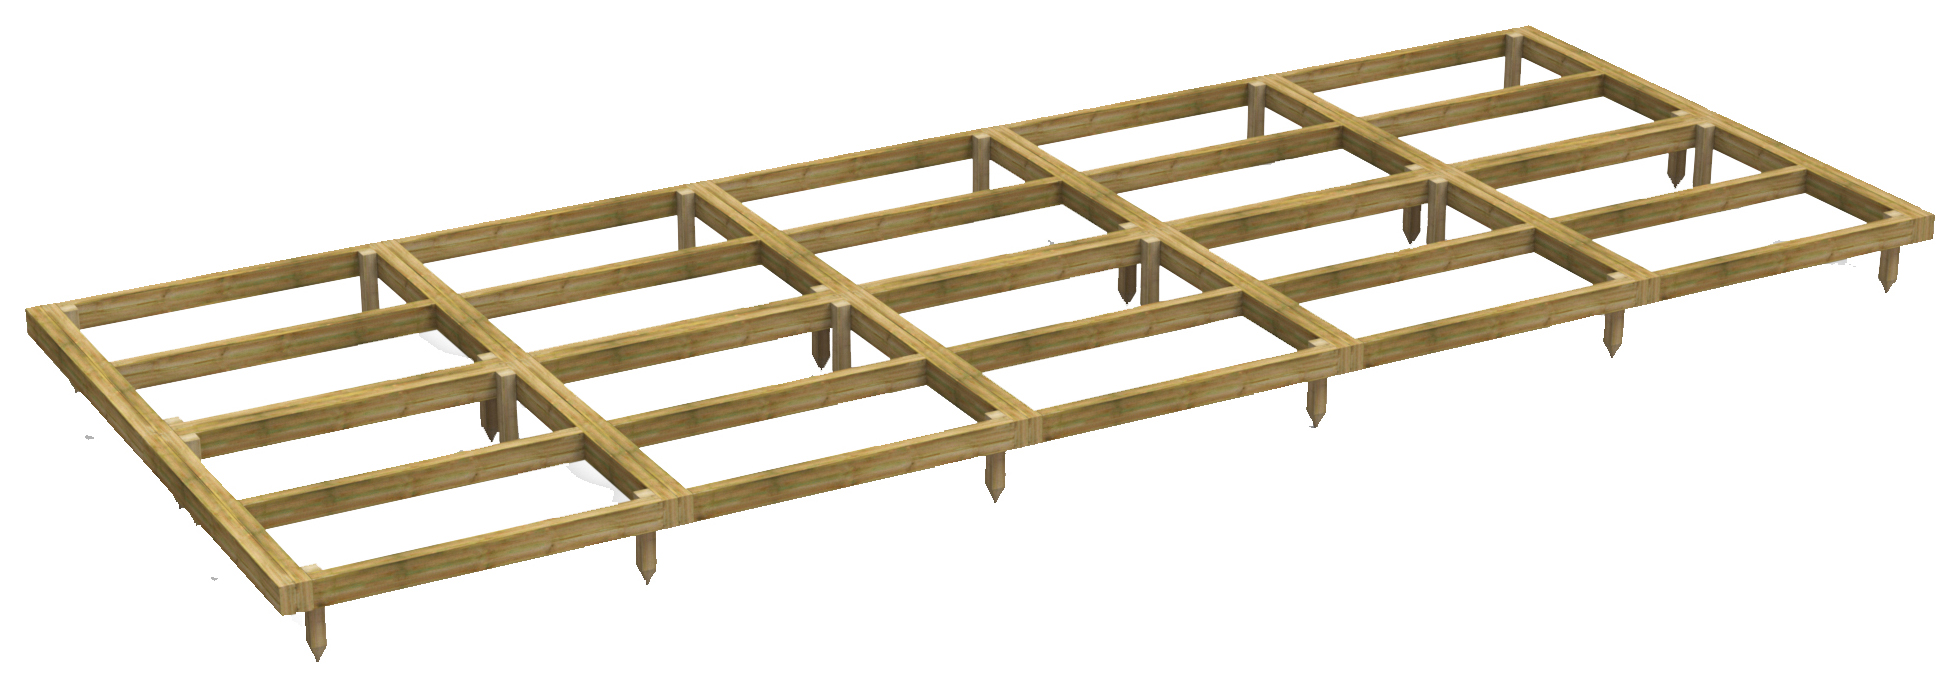 Image of Power Sheds 20 x 8ft Pressure Treated Garden Building Base Kit